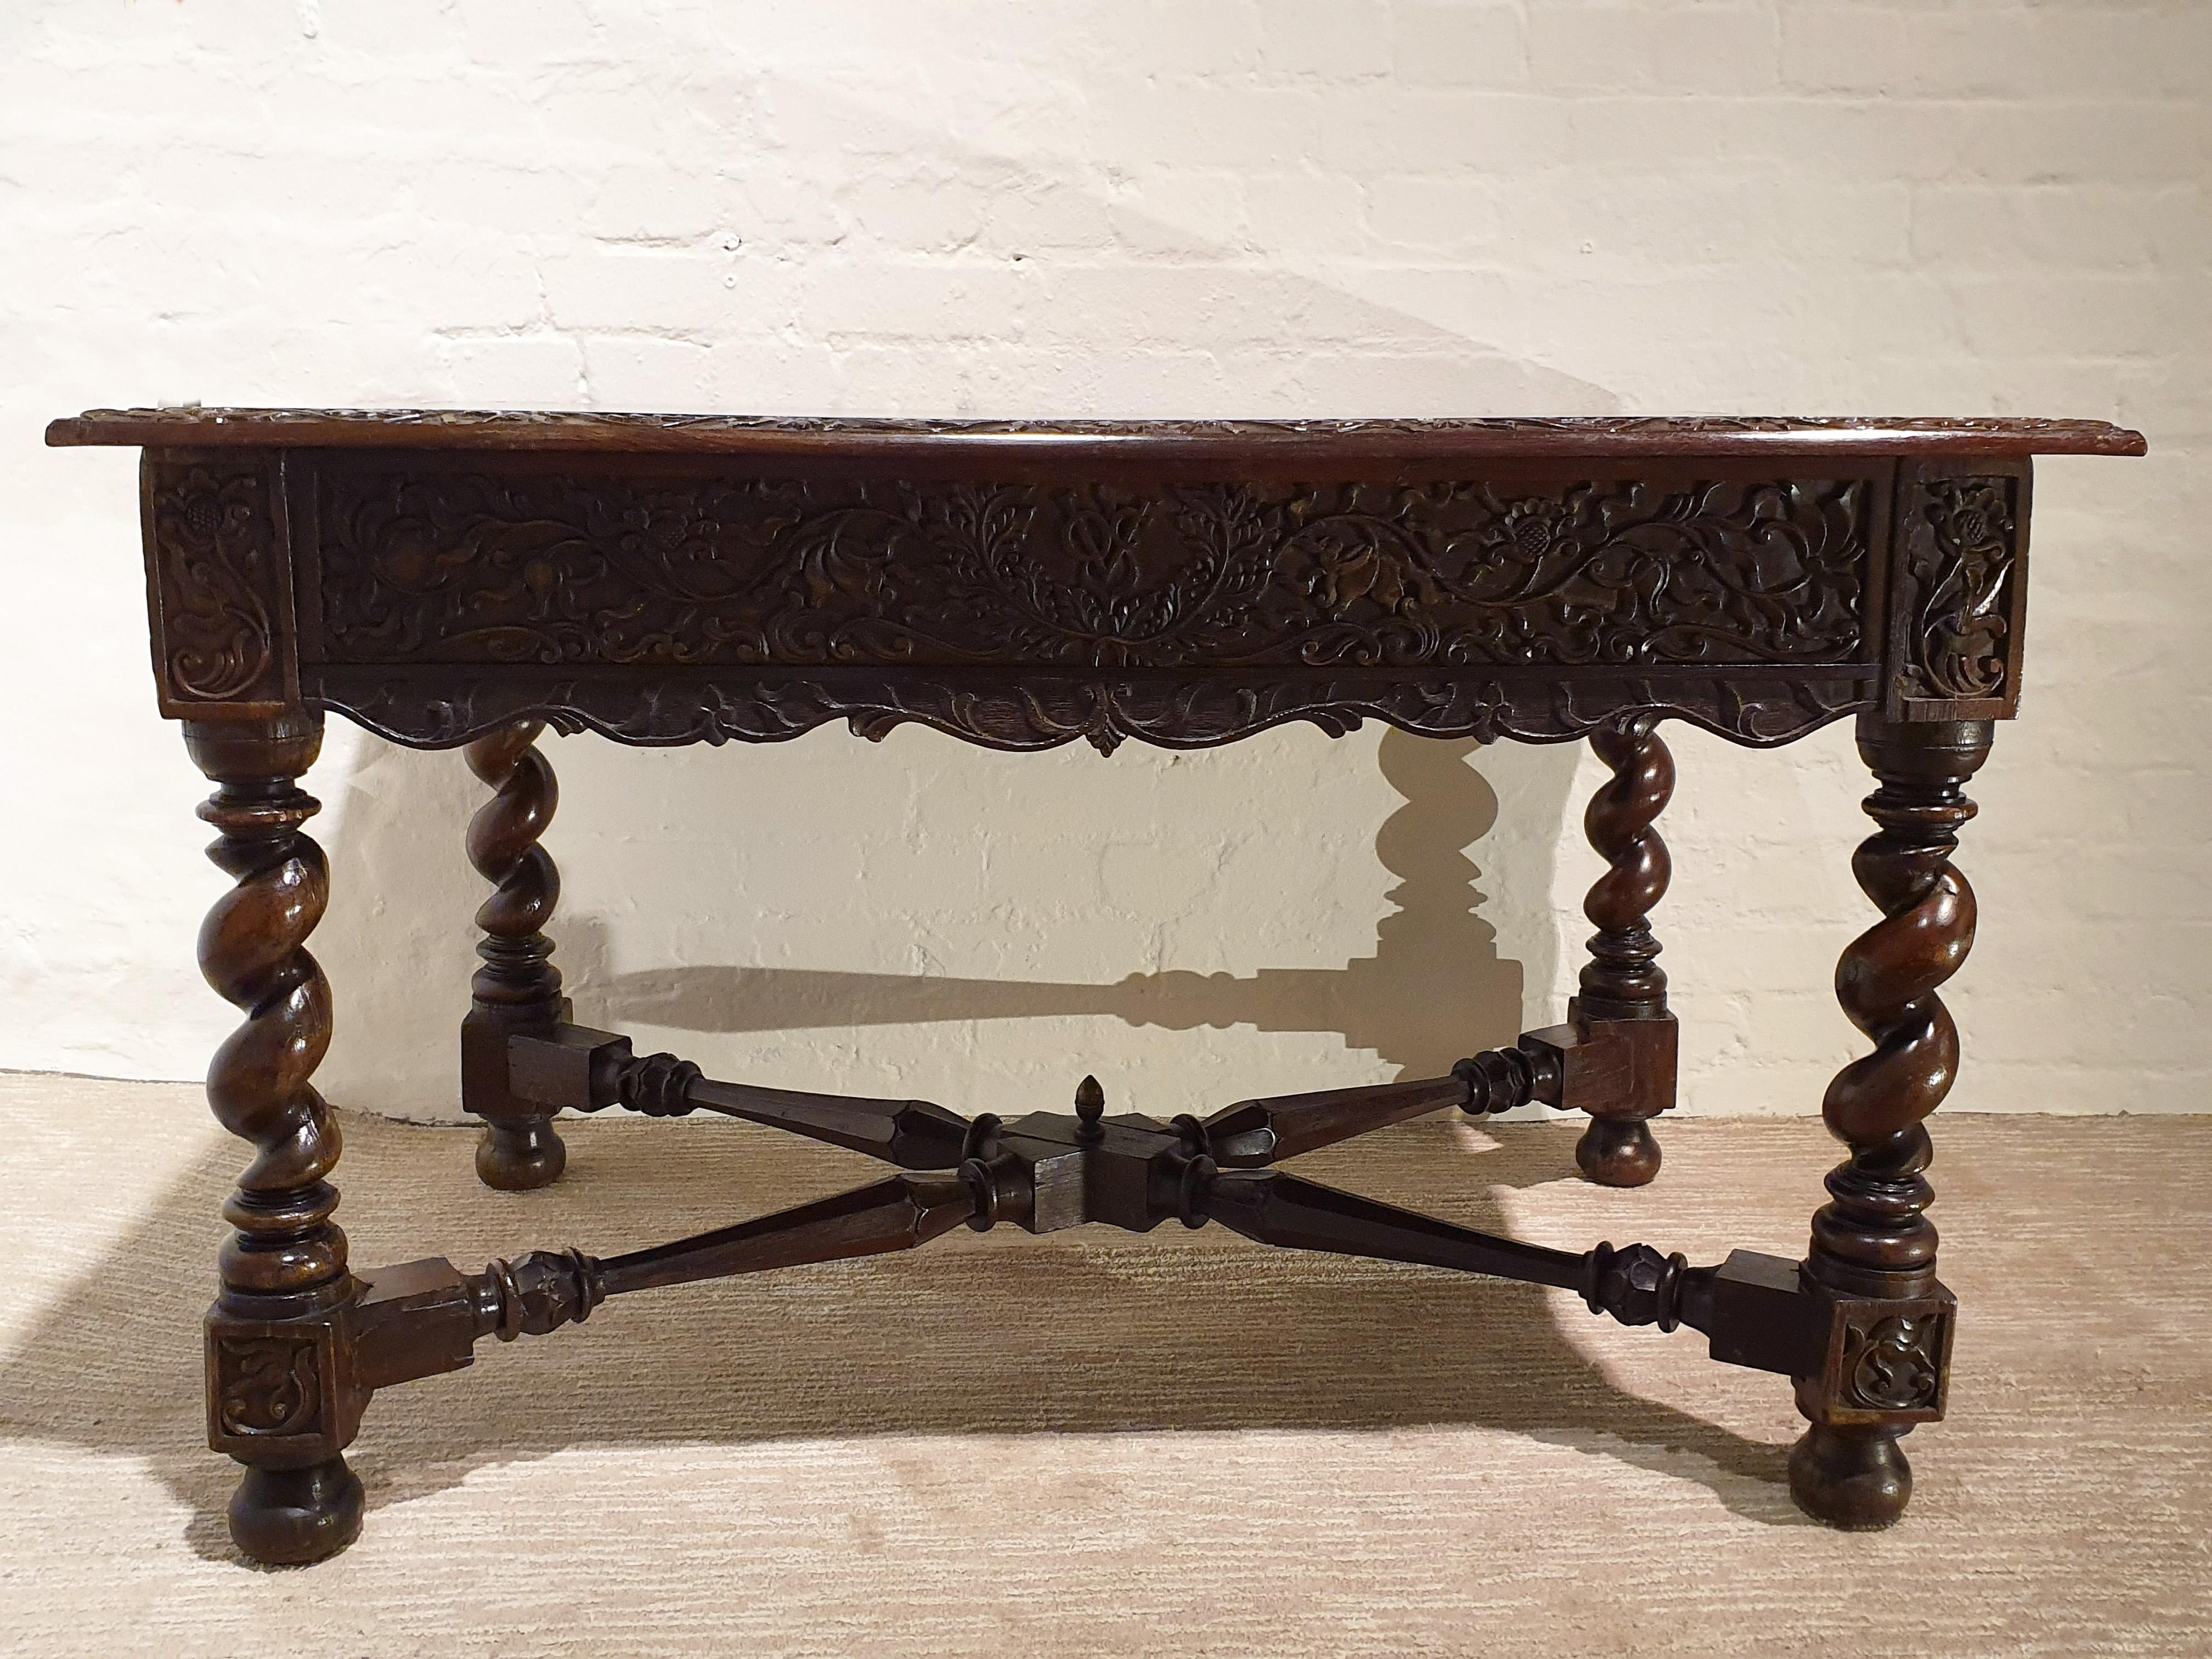 This beautiful and truly stunning 18th century rosewood table features an intricately and detailed hand-carved design of scrolls and vines around the sides and top edges of the piece, with an inset hardwood burr top. It was done for the Dutch East